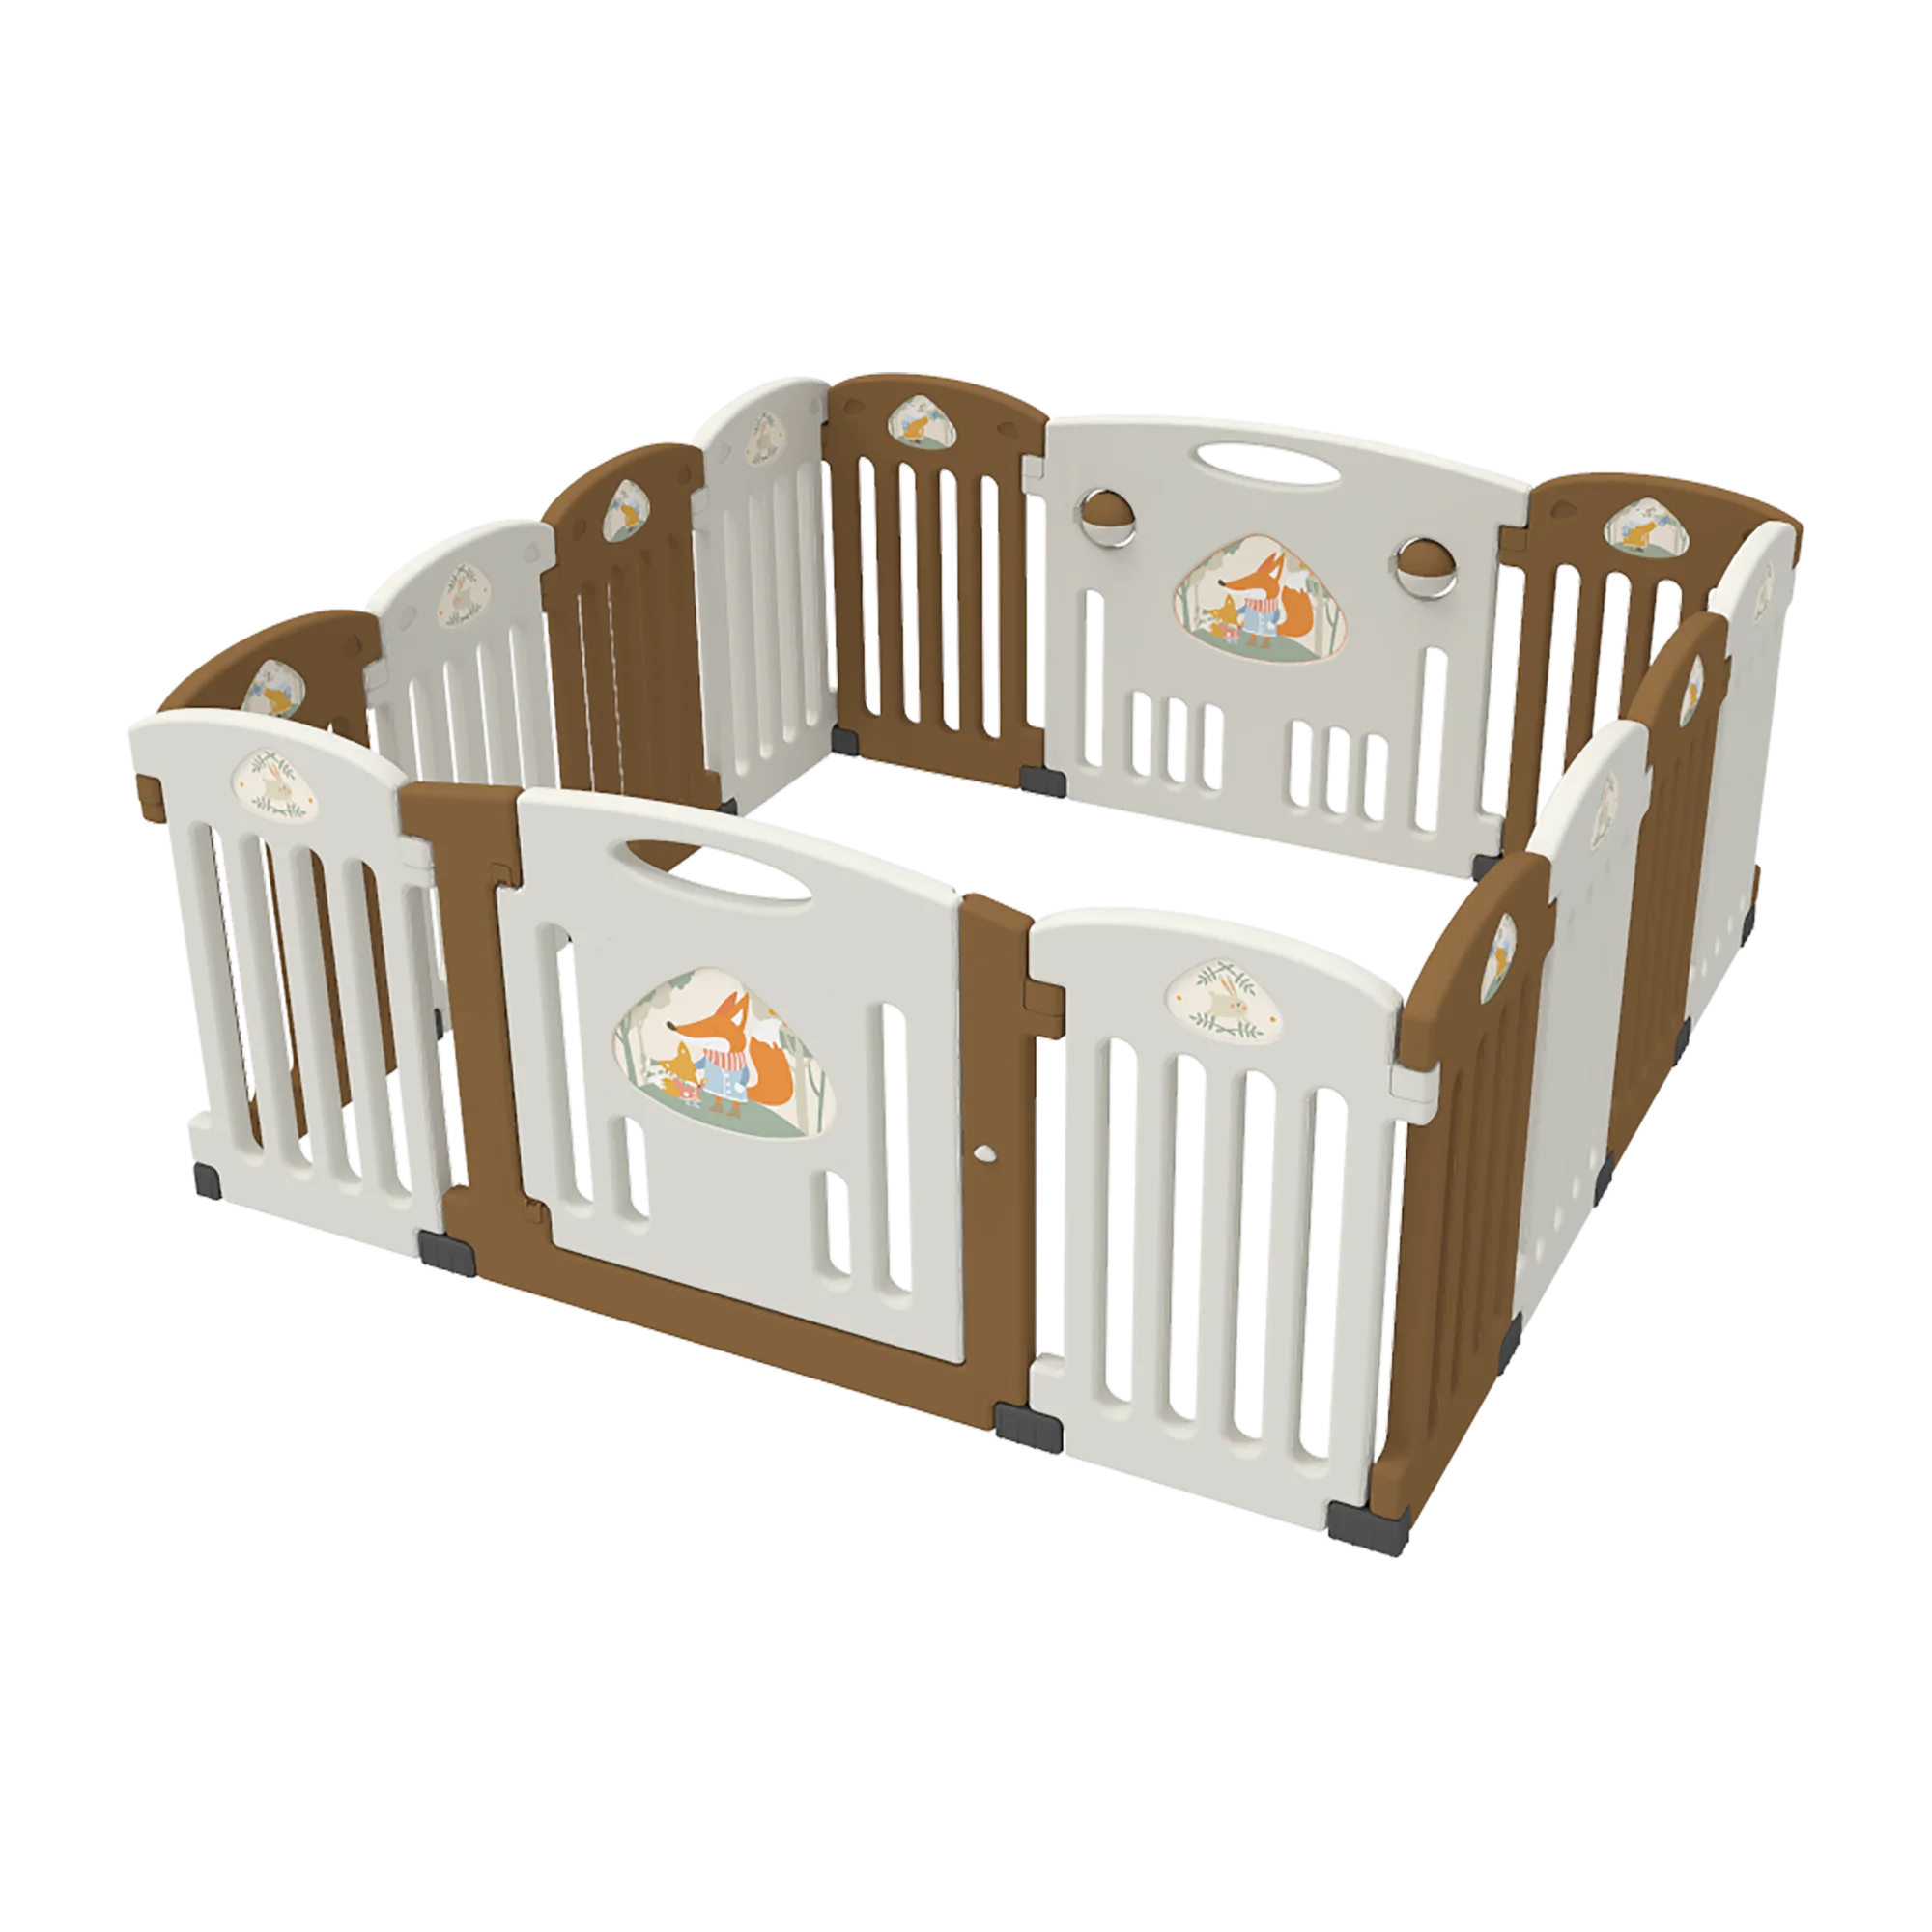 120*120*65 Kids Fence for Infants Toddlers Arkmiido Baby Playpen Sturdy Safety Play Yard with Super Soft Breathable Mesh Indoor & Outdoor Kids Activity Center with Anti-Slip Base